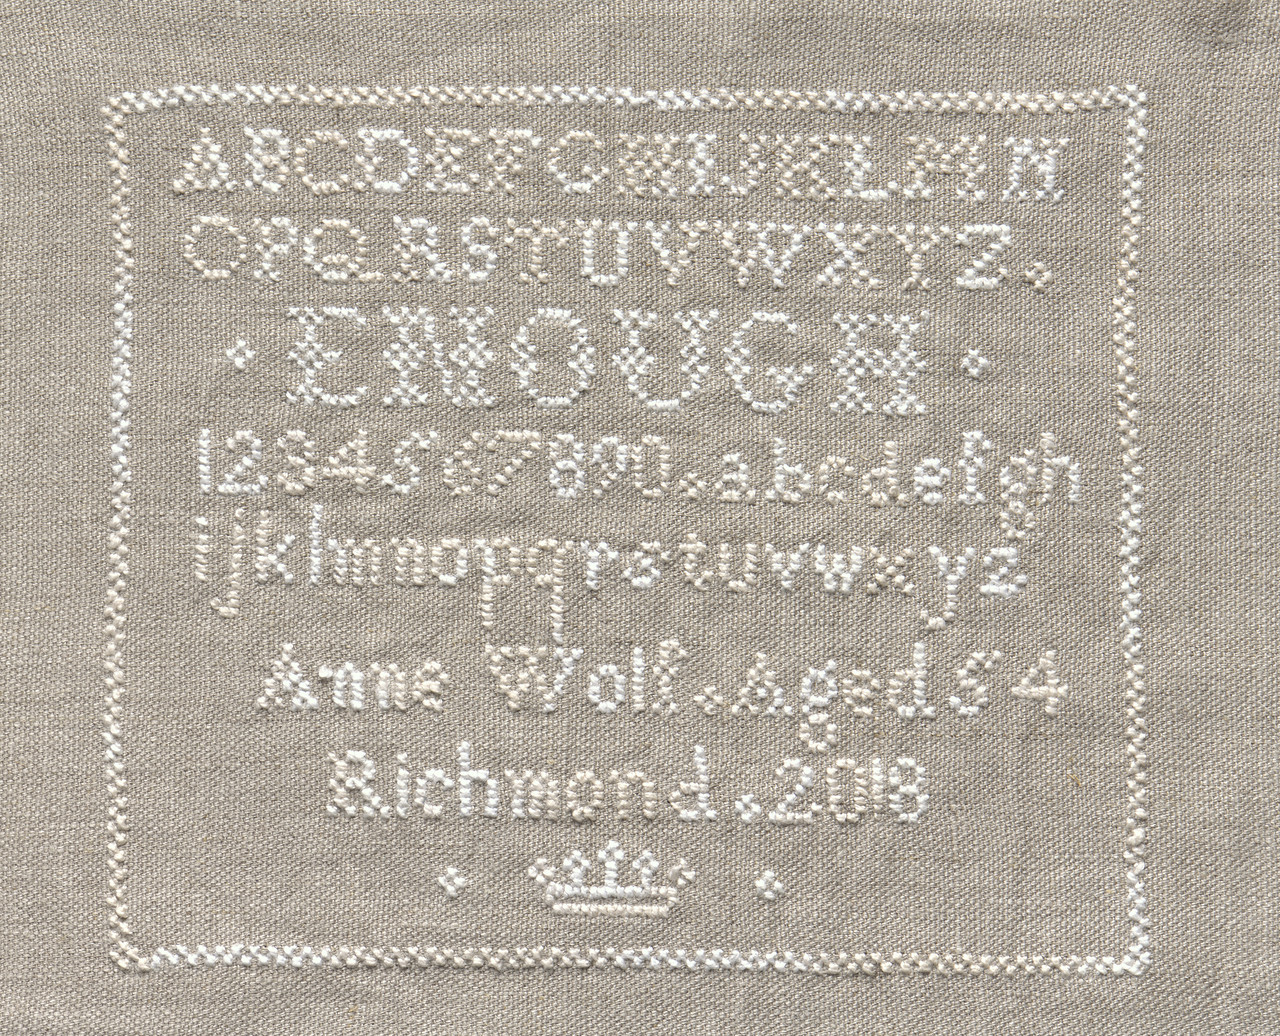 Stitched wording on linen